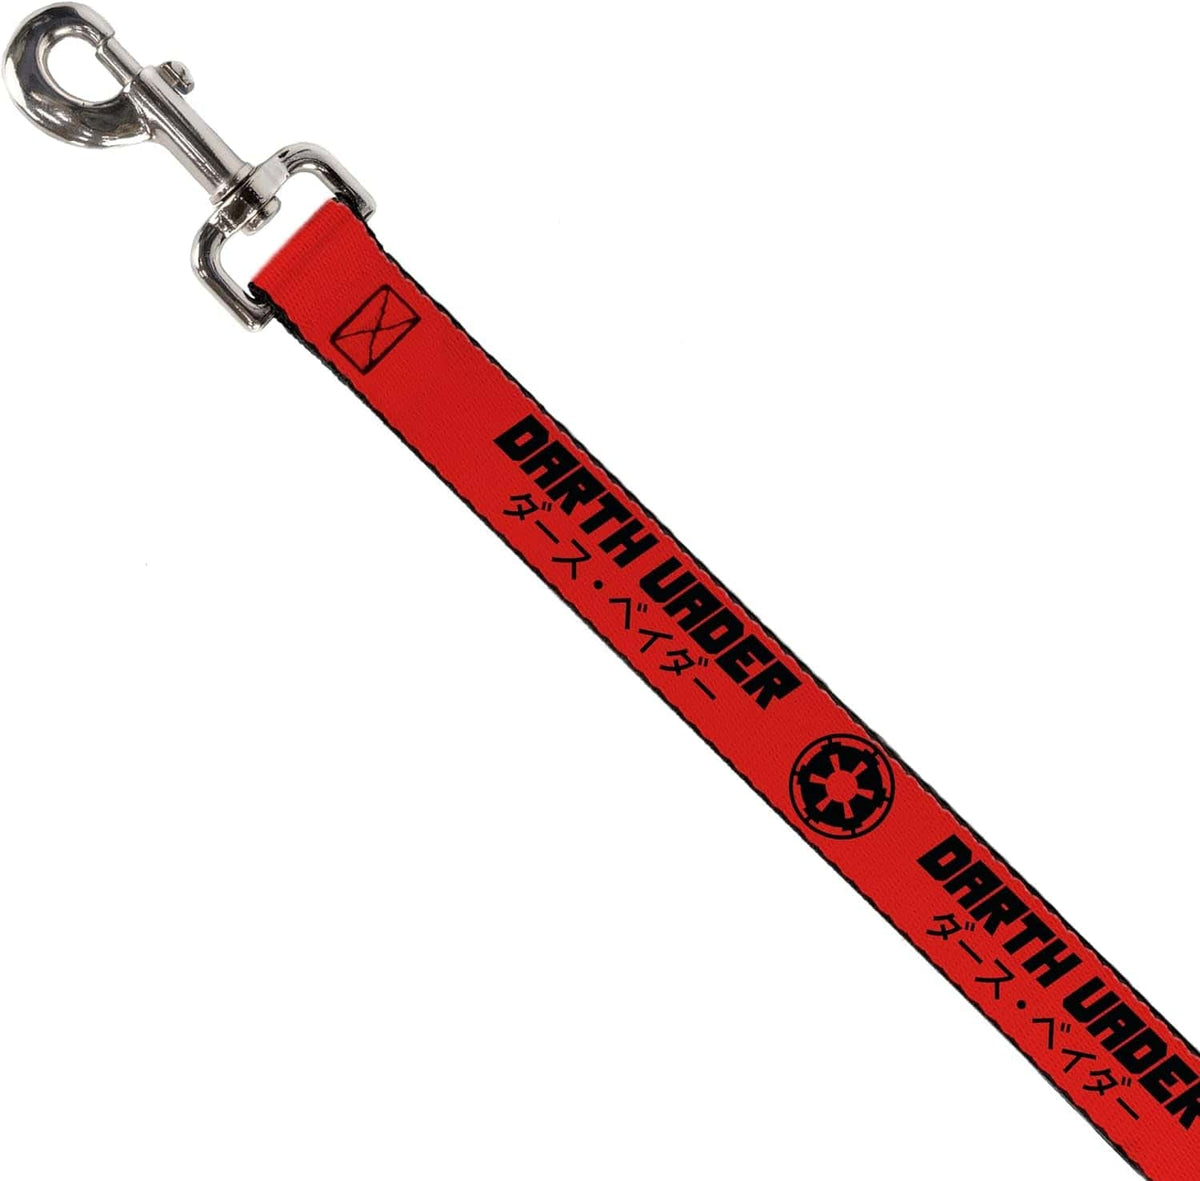 Star Wars Pet Leash, Dog Leash, Star Wars Darth Vader Japanese Characters and Logo Red Black, 6 Feet Long 1.0 Inch Wide